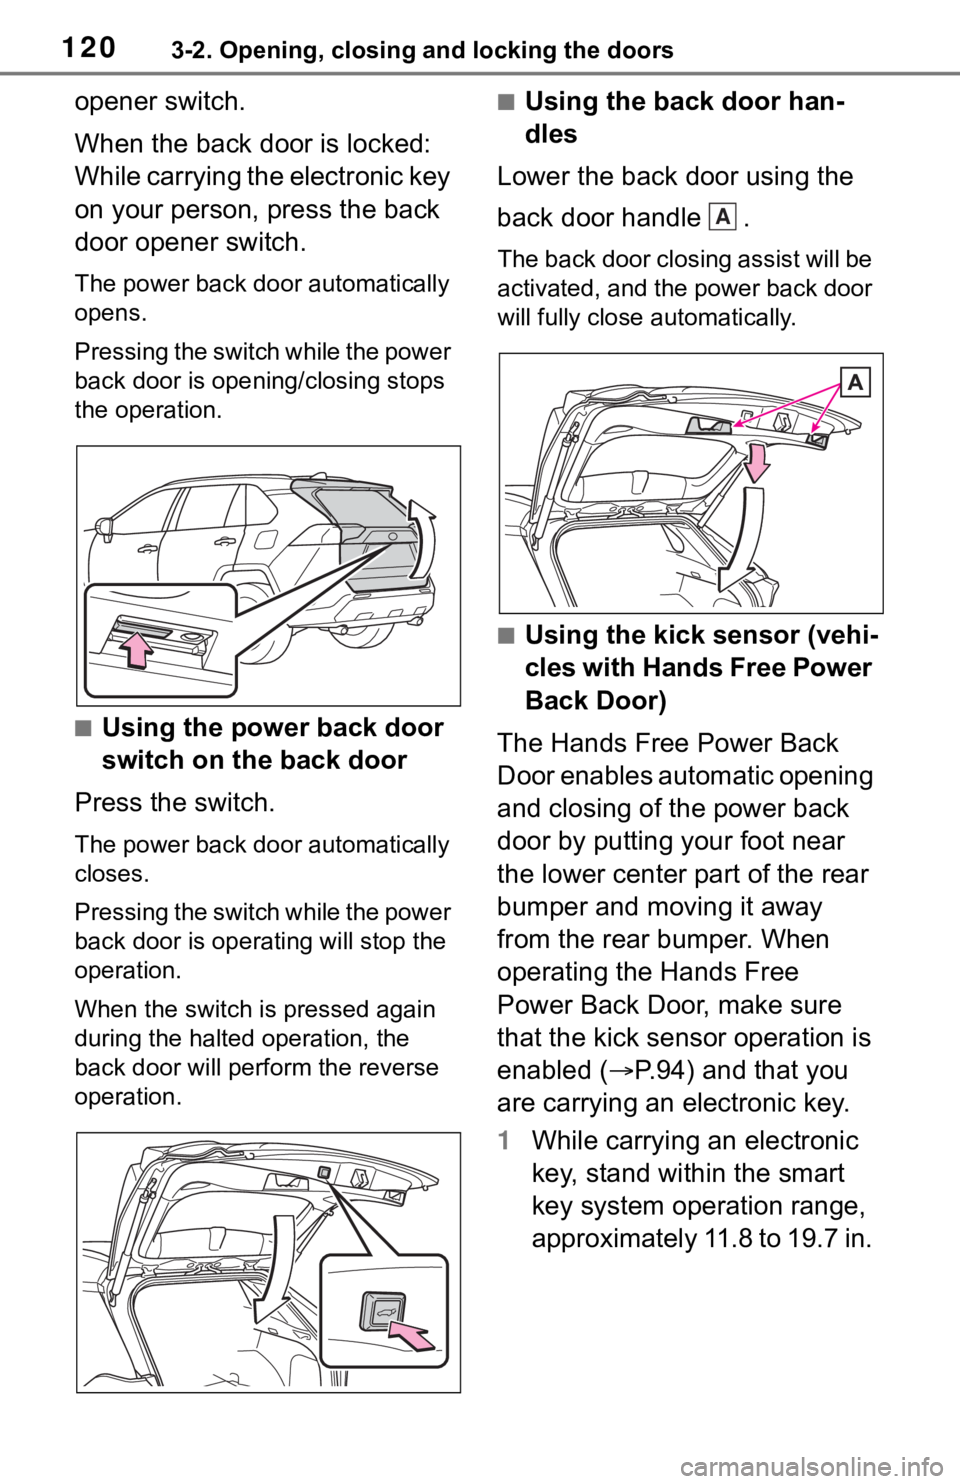 TOYOTA RAV4 2019  Owners Manual (in English) 1203-2. Opening, closing and locking the doors
opener switch.
When the back door is locked: 
While carrying the electronic key 
on your person, press the back 
door opener switch.
The power back door 